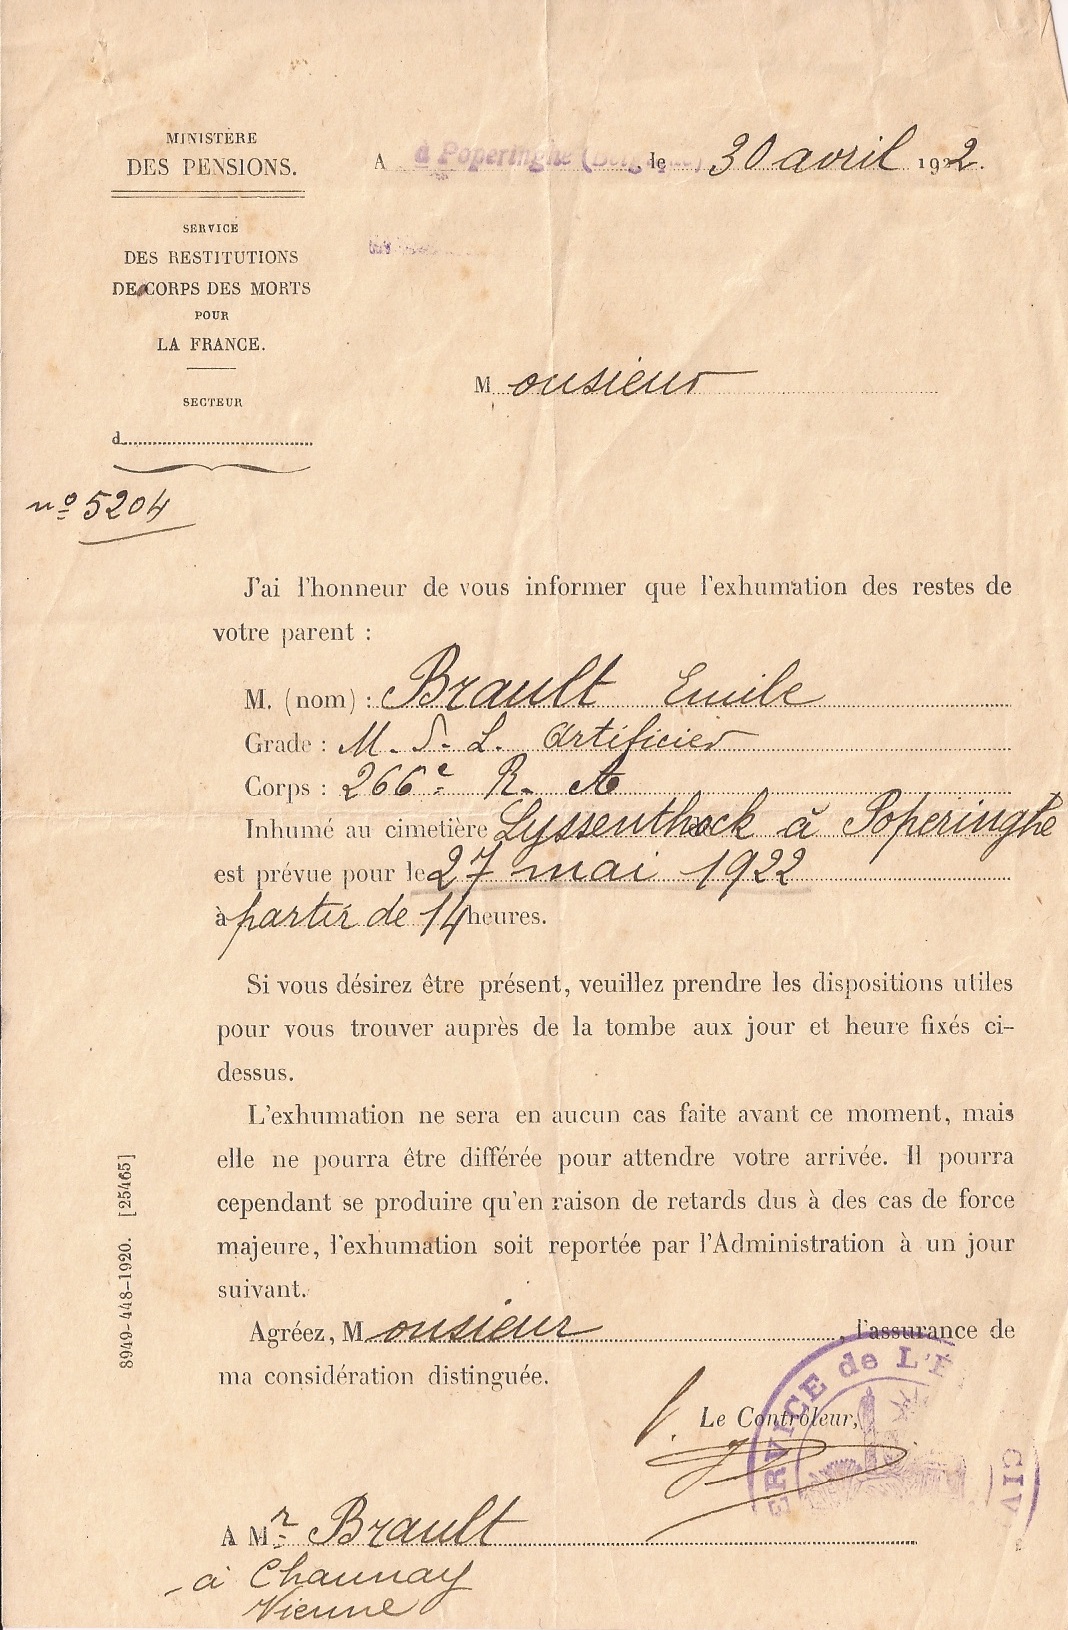 courrier pour exhumation 30 avril 1922